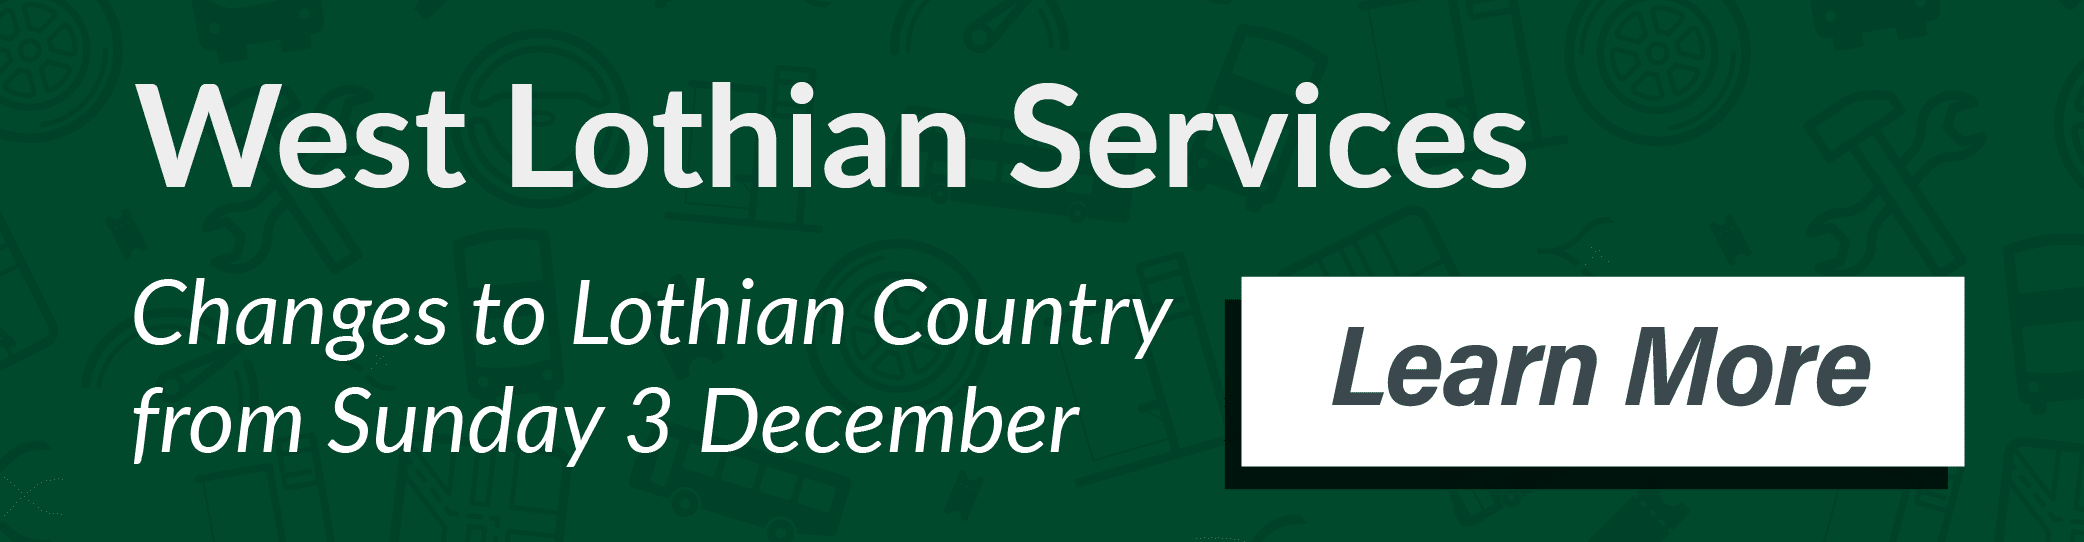 West Lothian Services. Changes to Lothian Country network from Sunday 3 December 2023. Learn More.